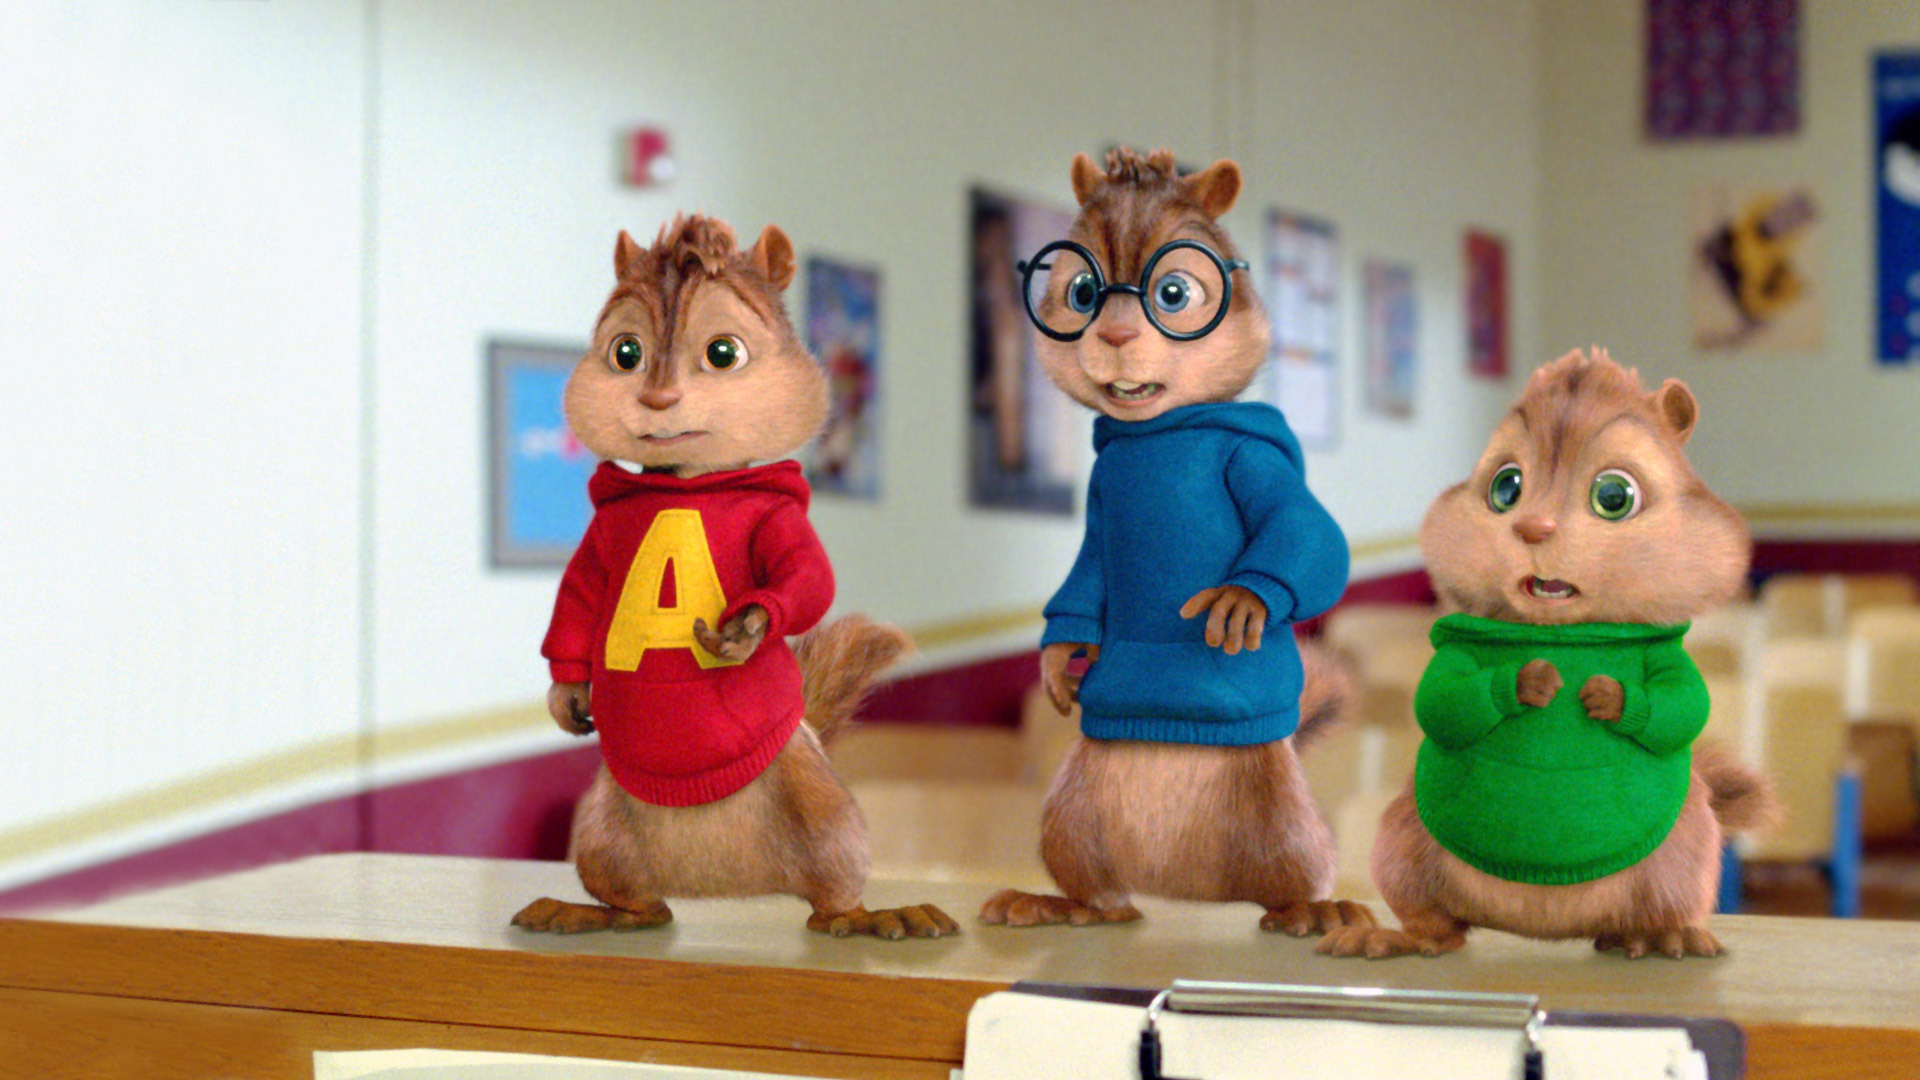 Alvin And The Chipmunks: The Squeakquel HD wallpapers, Desktop wallpaper - most viewed